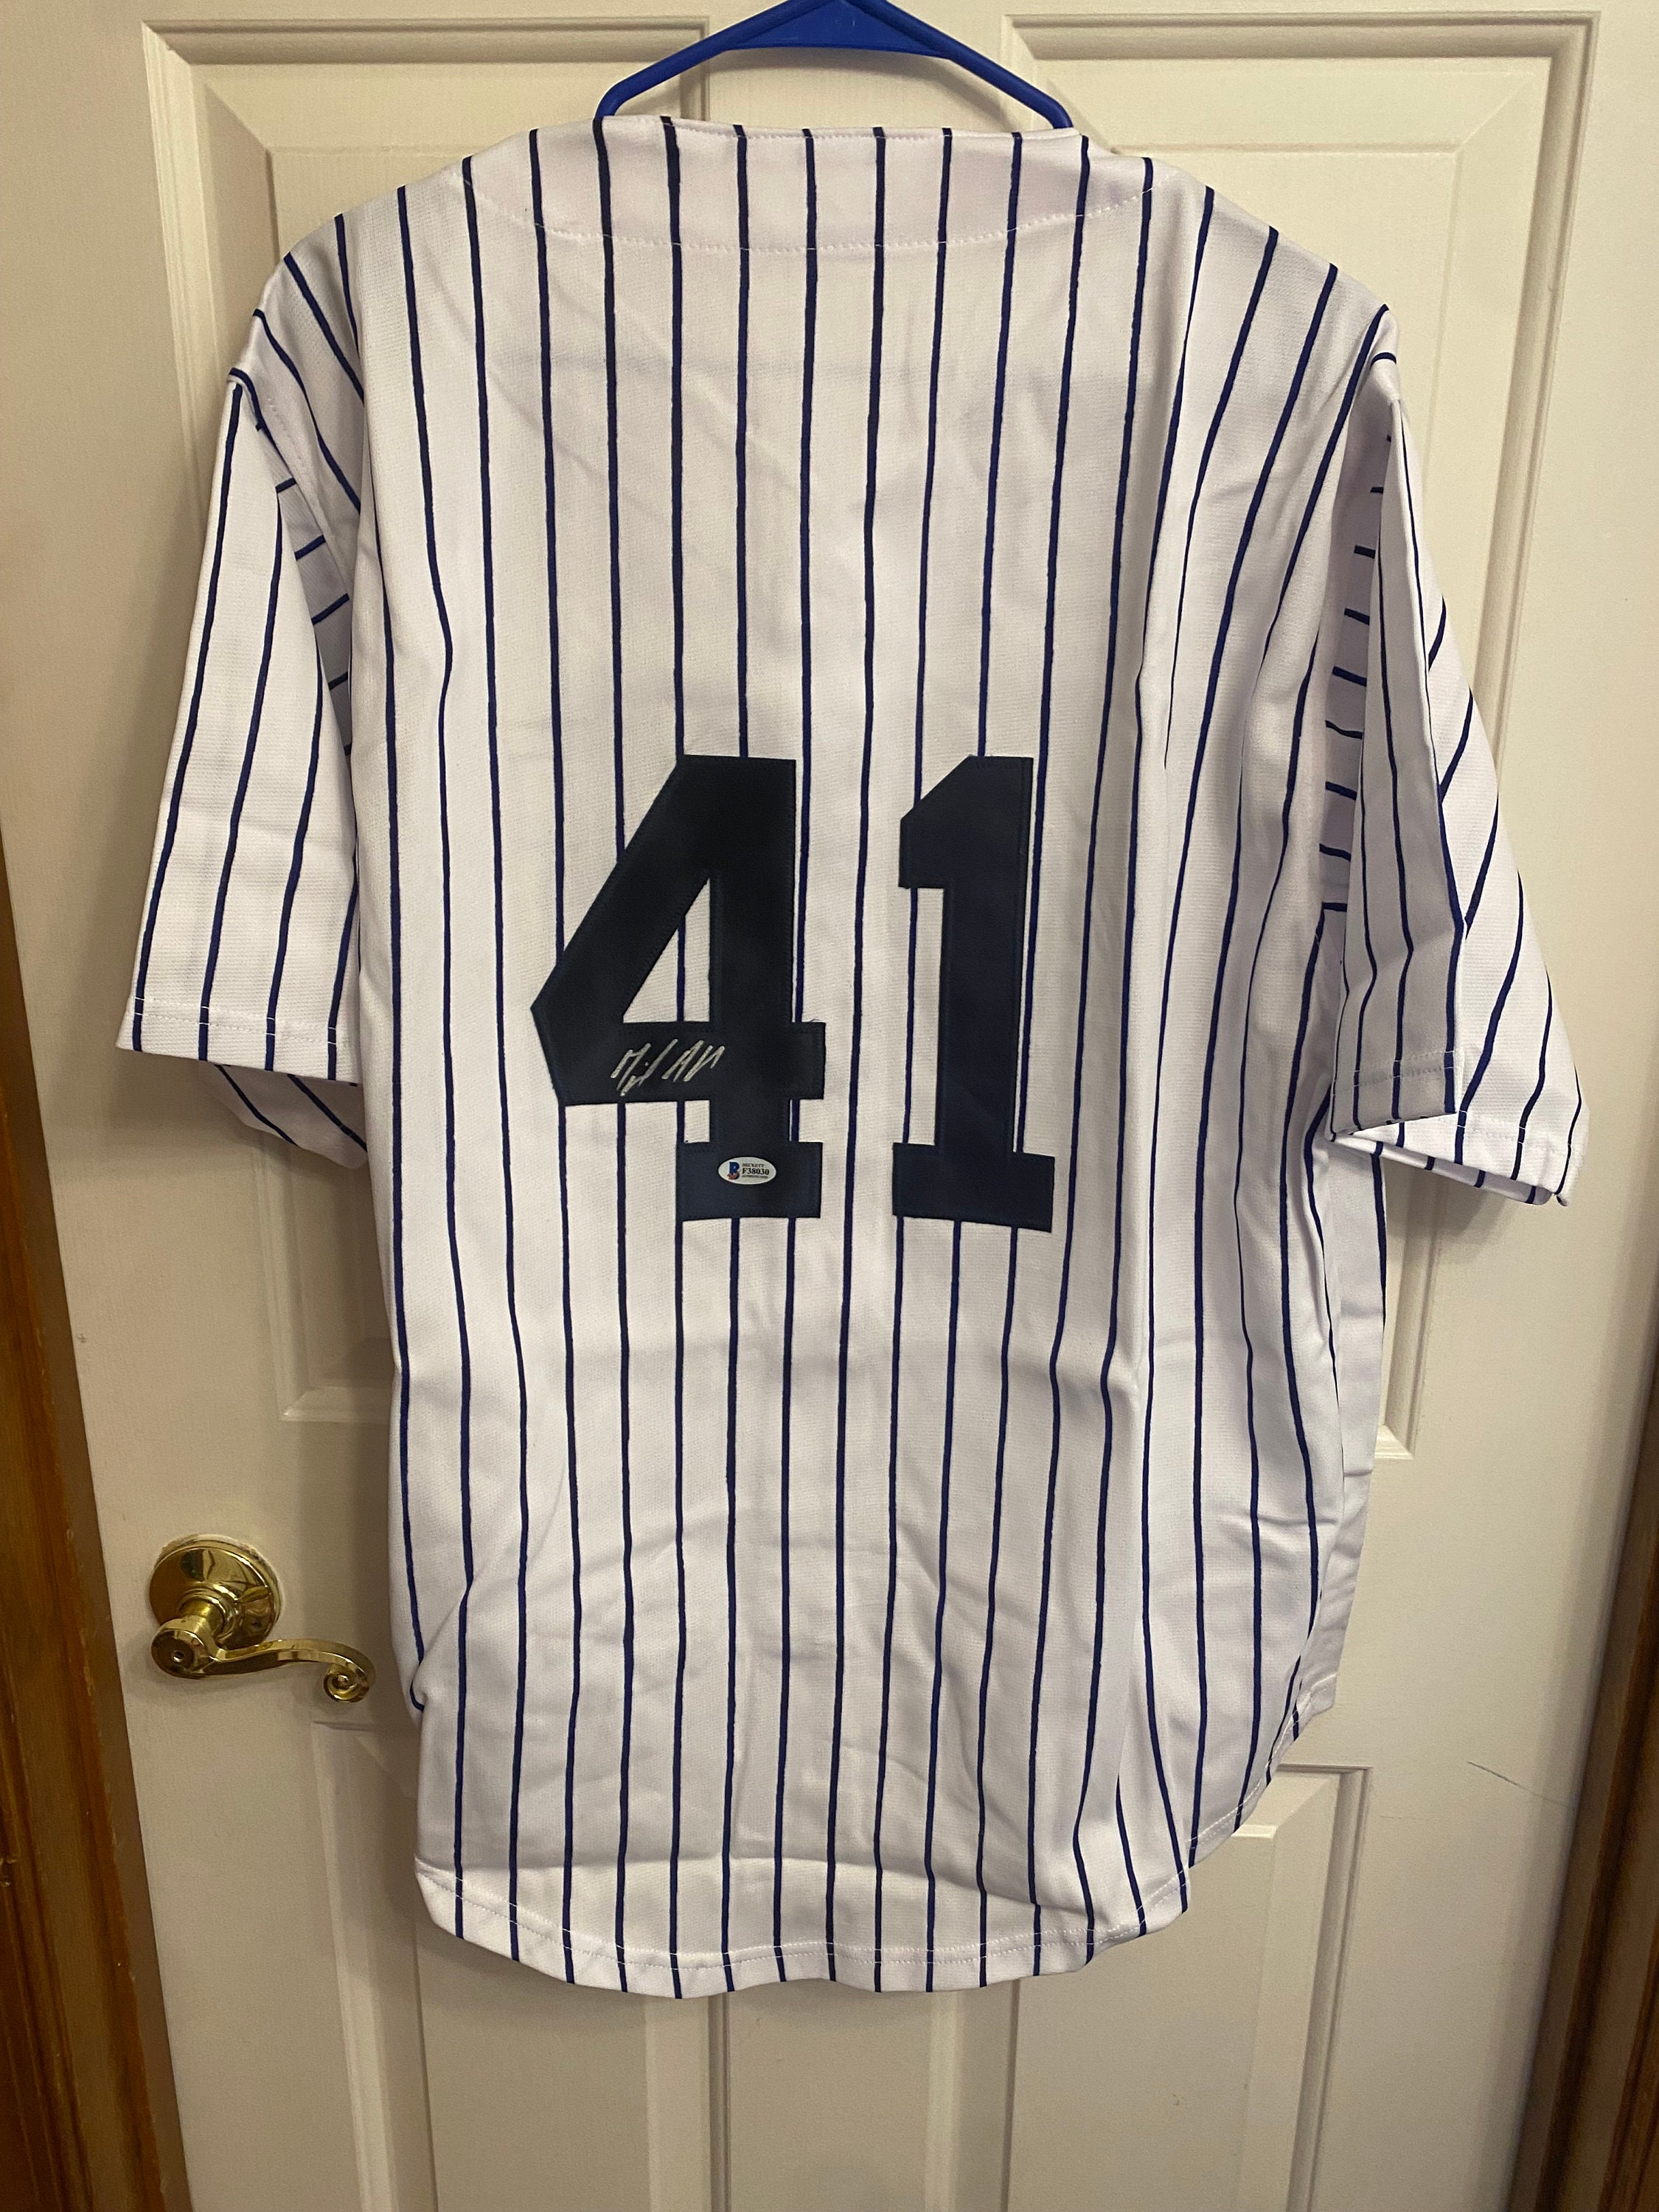 Miguel Andujar Autographed Yankees jersey